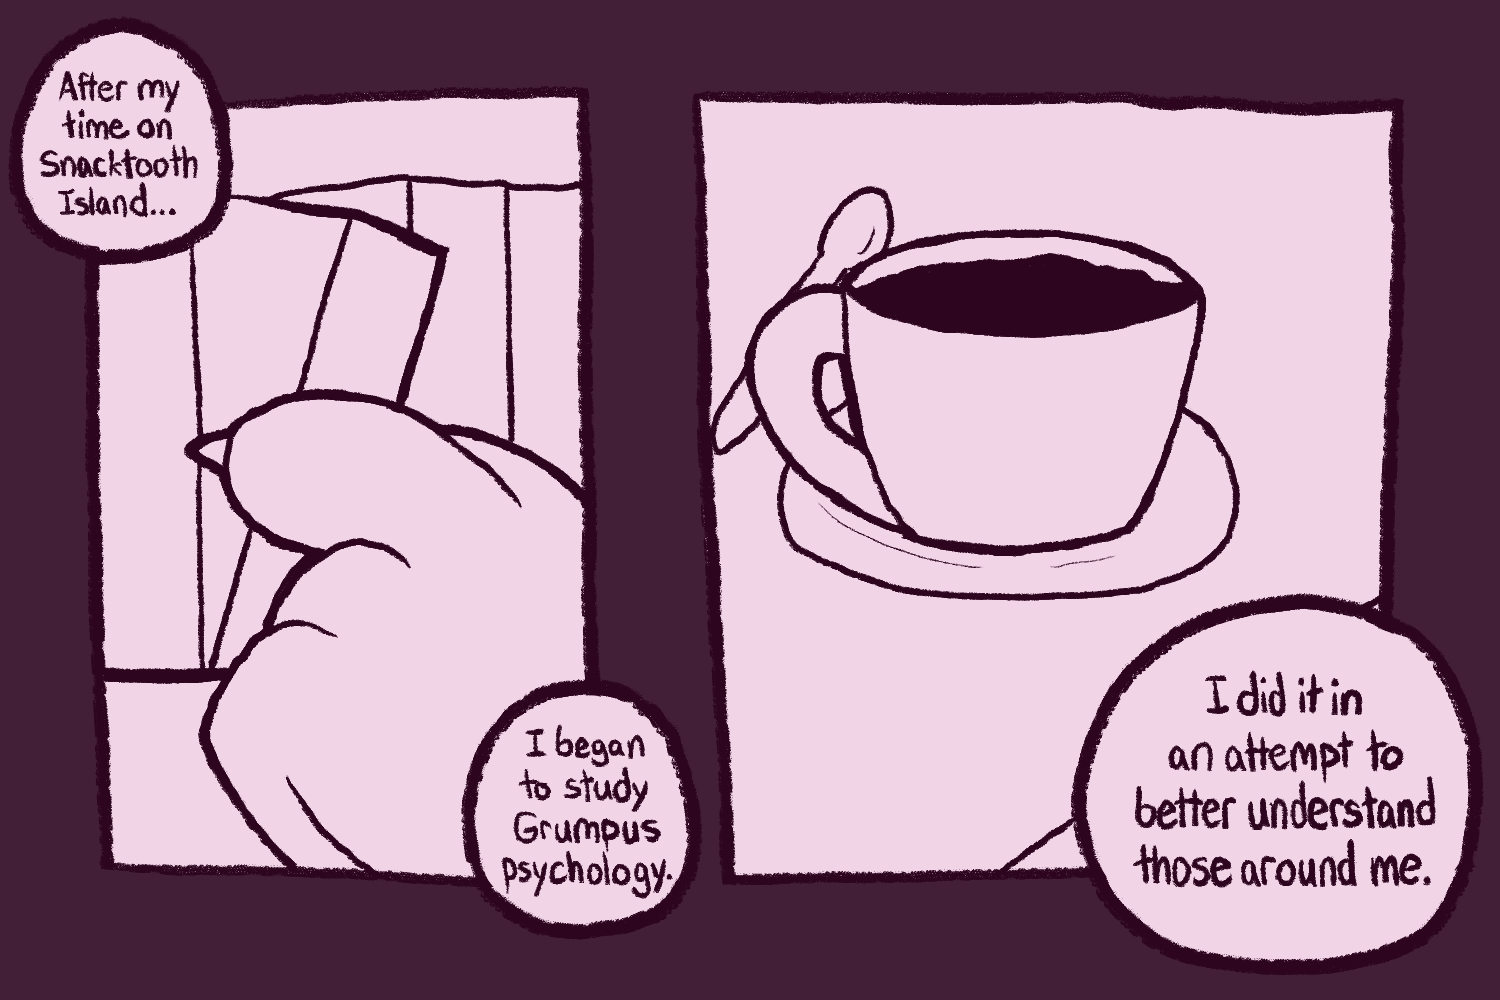 A Bugsnax fan comic. It shows two panels. One is a close up of Floofty taking a book off a shelf, and the other is a close-up of a cup of coffee. Text in speech bubbles reads, 'After my time on Snacktooth Island, I began to study Grumpus psychology. I did it in an attempt to better understand those around me.'